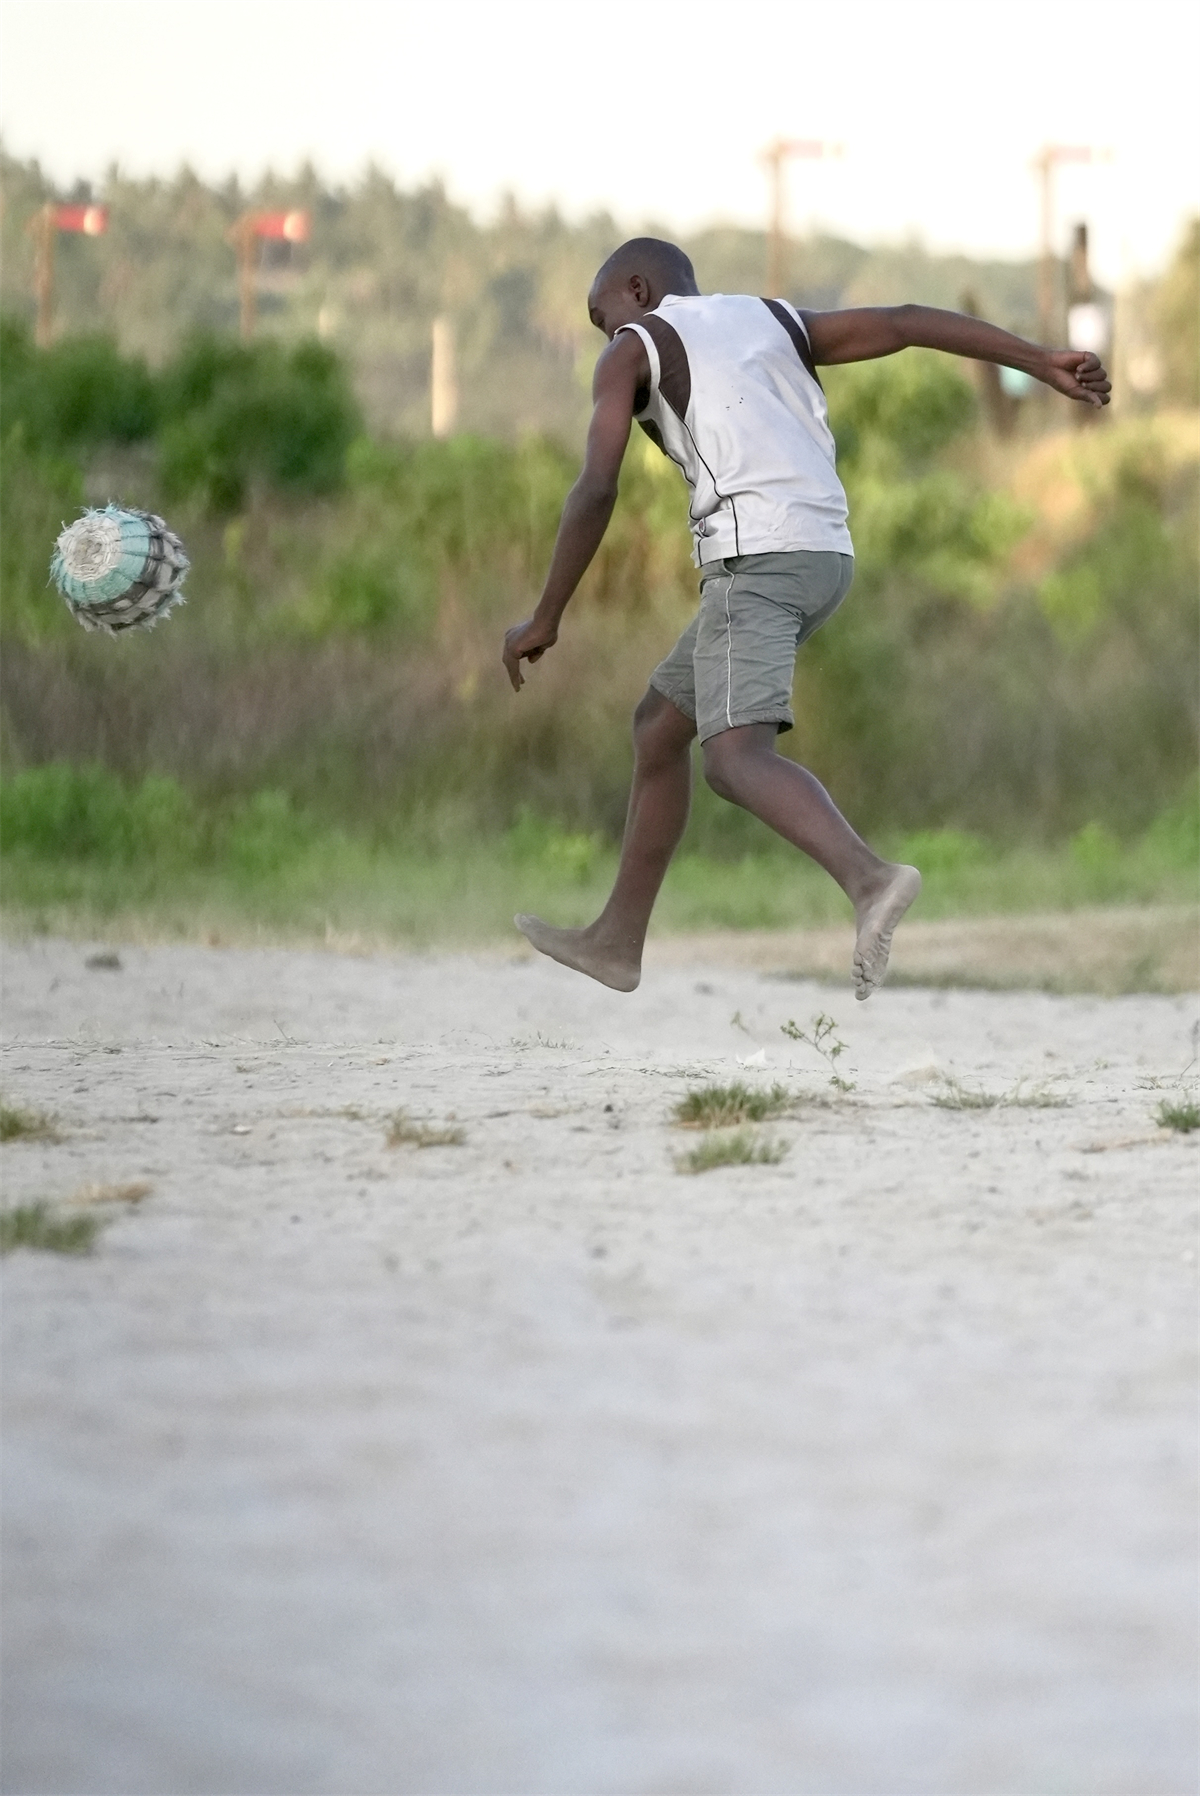 A barefooted youngster enjoys a game of football despite the lack of a proper playing field or ball at a small village in Tanzania. /CGTN